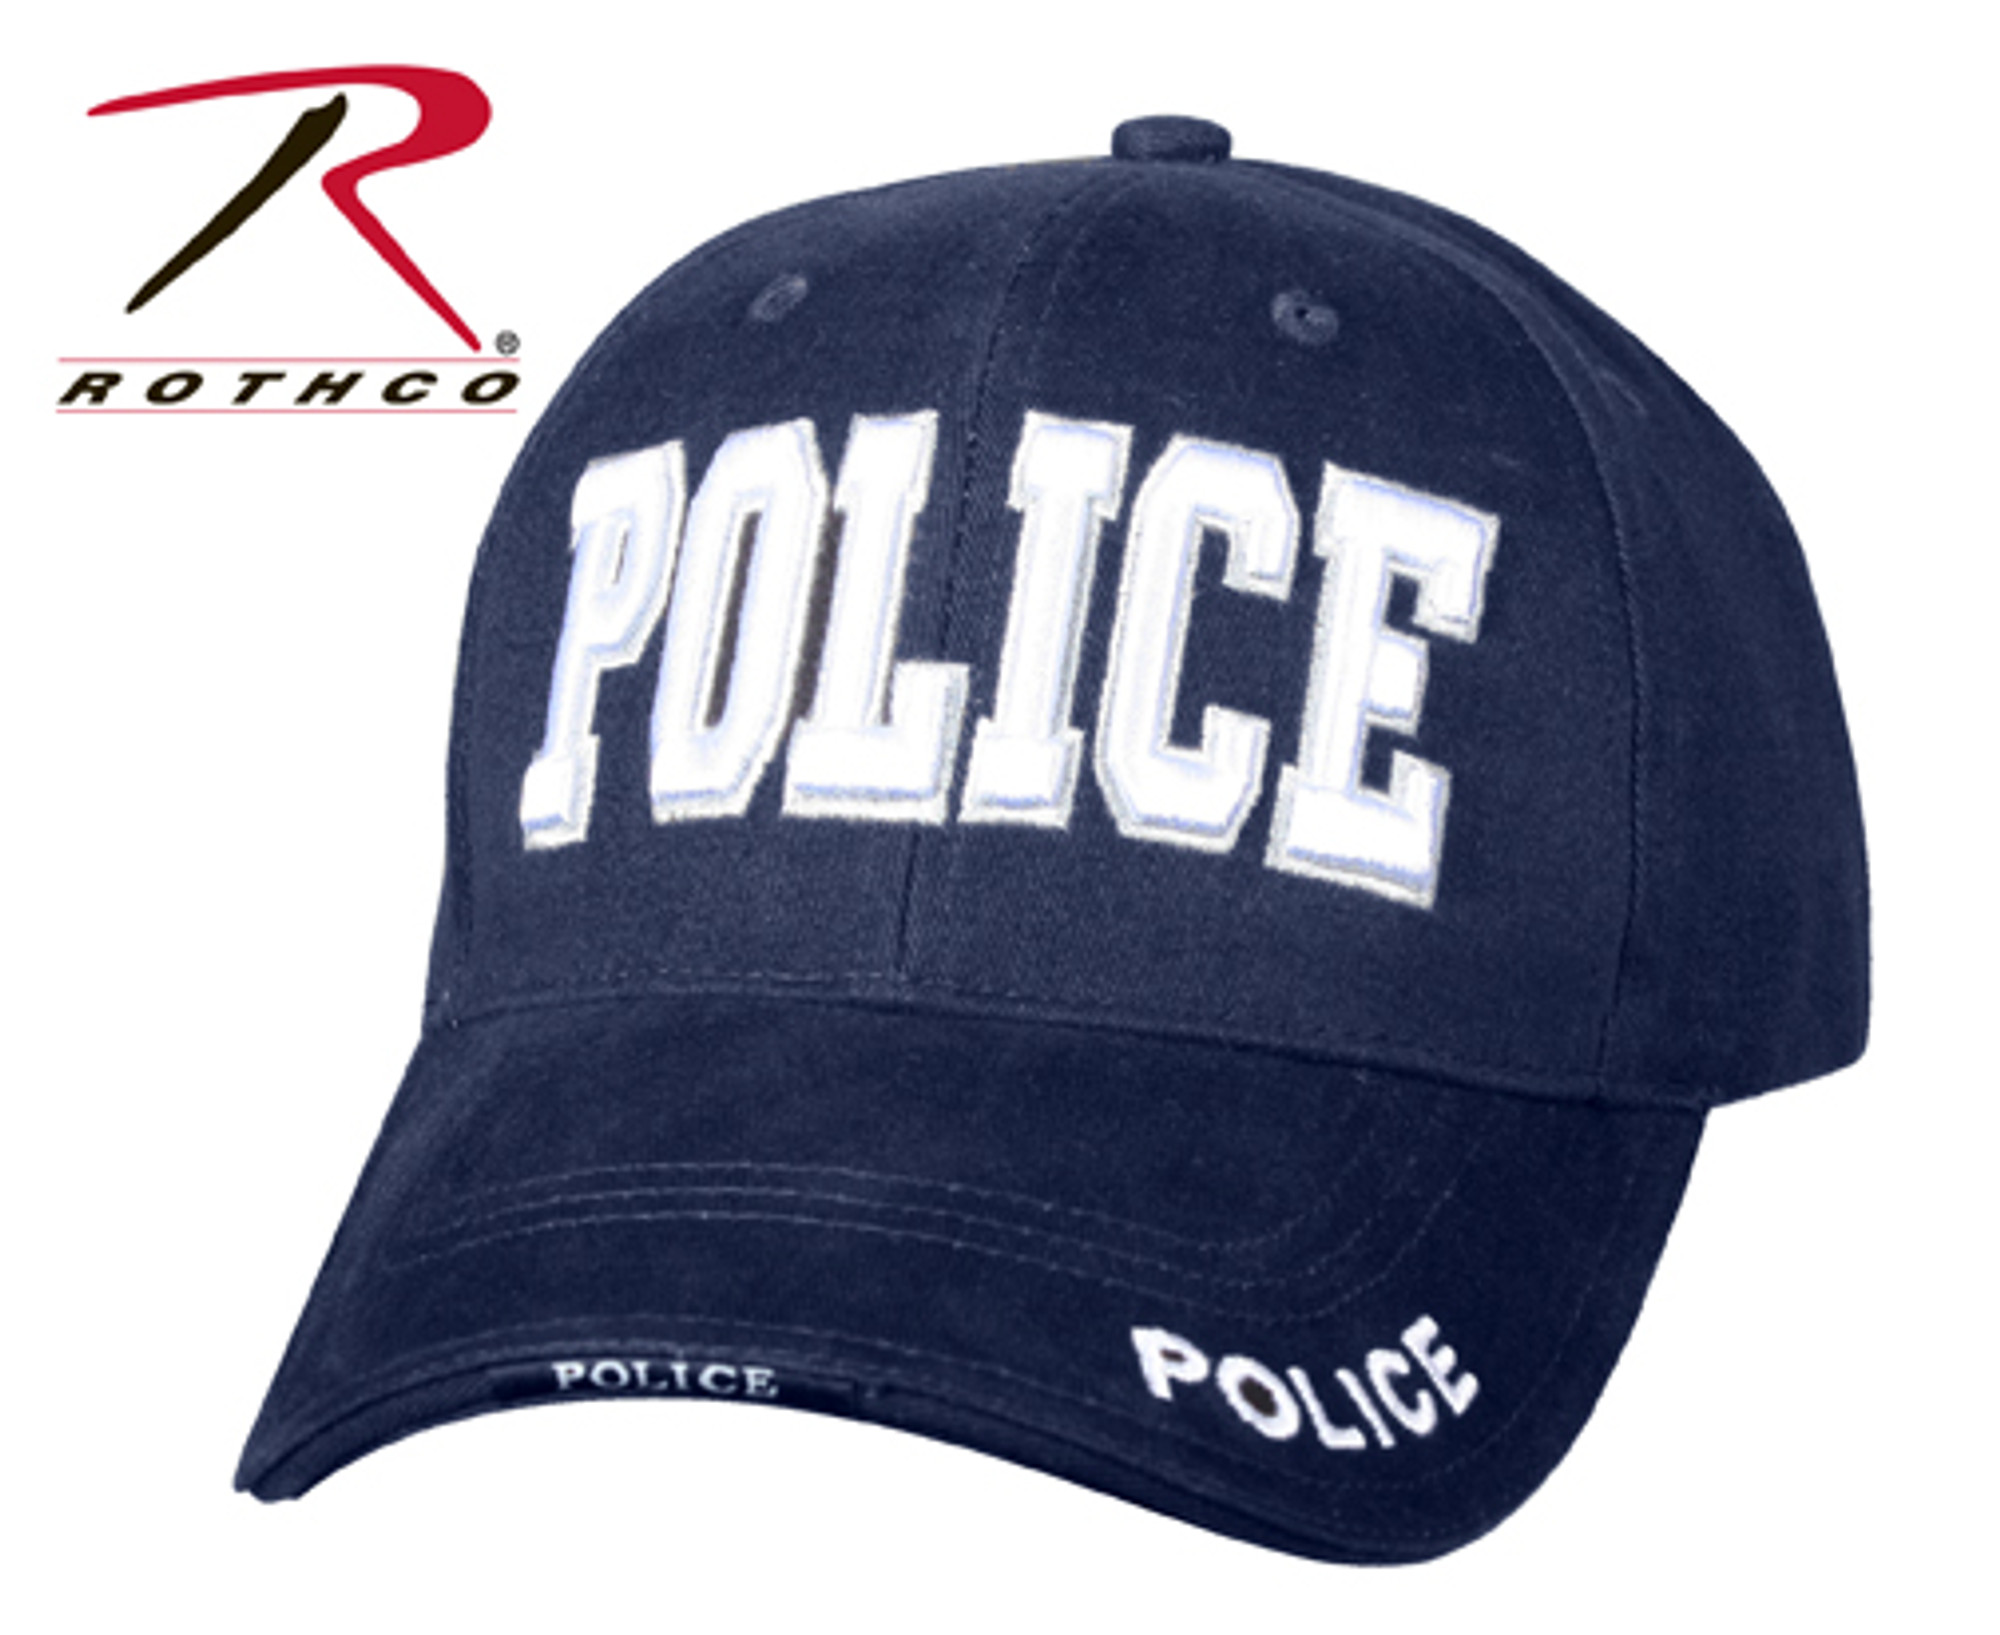 Rothco Deluxe Police Low Profile Cap - Navy Blue